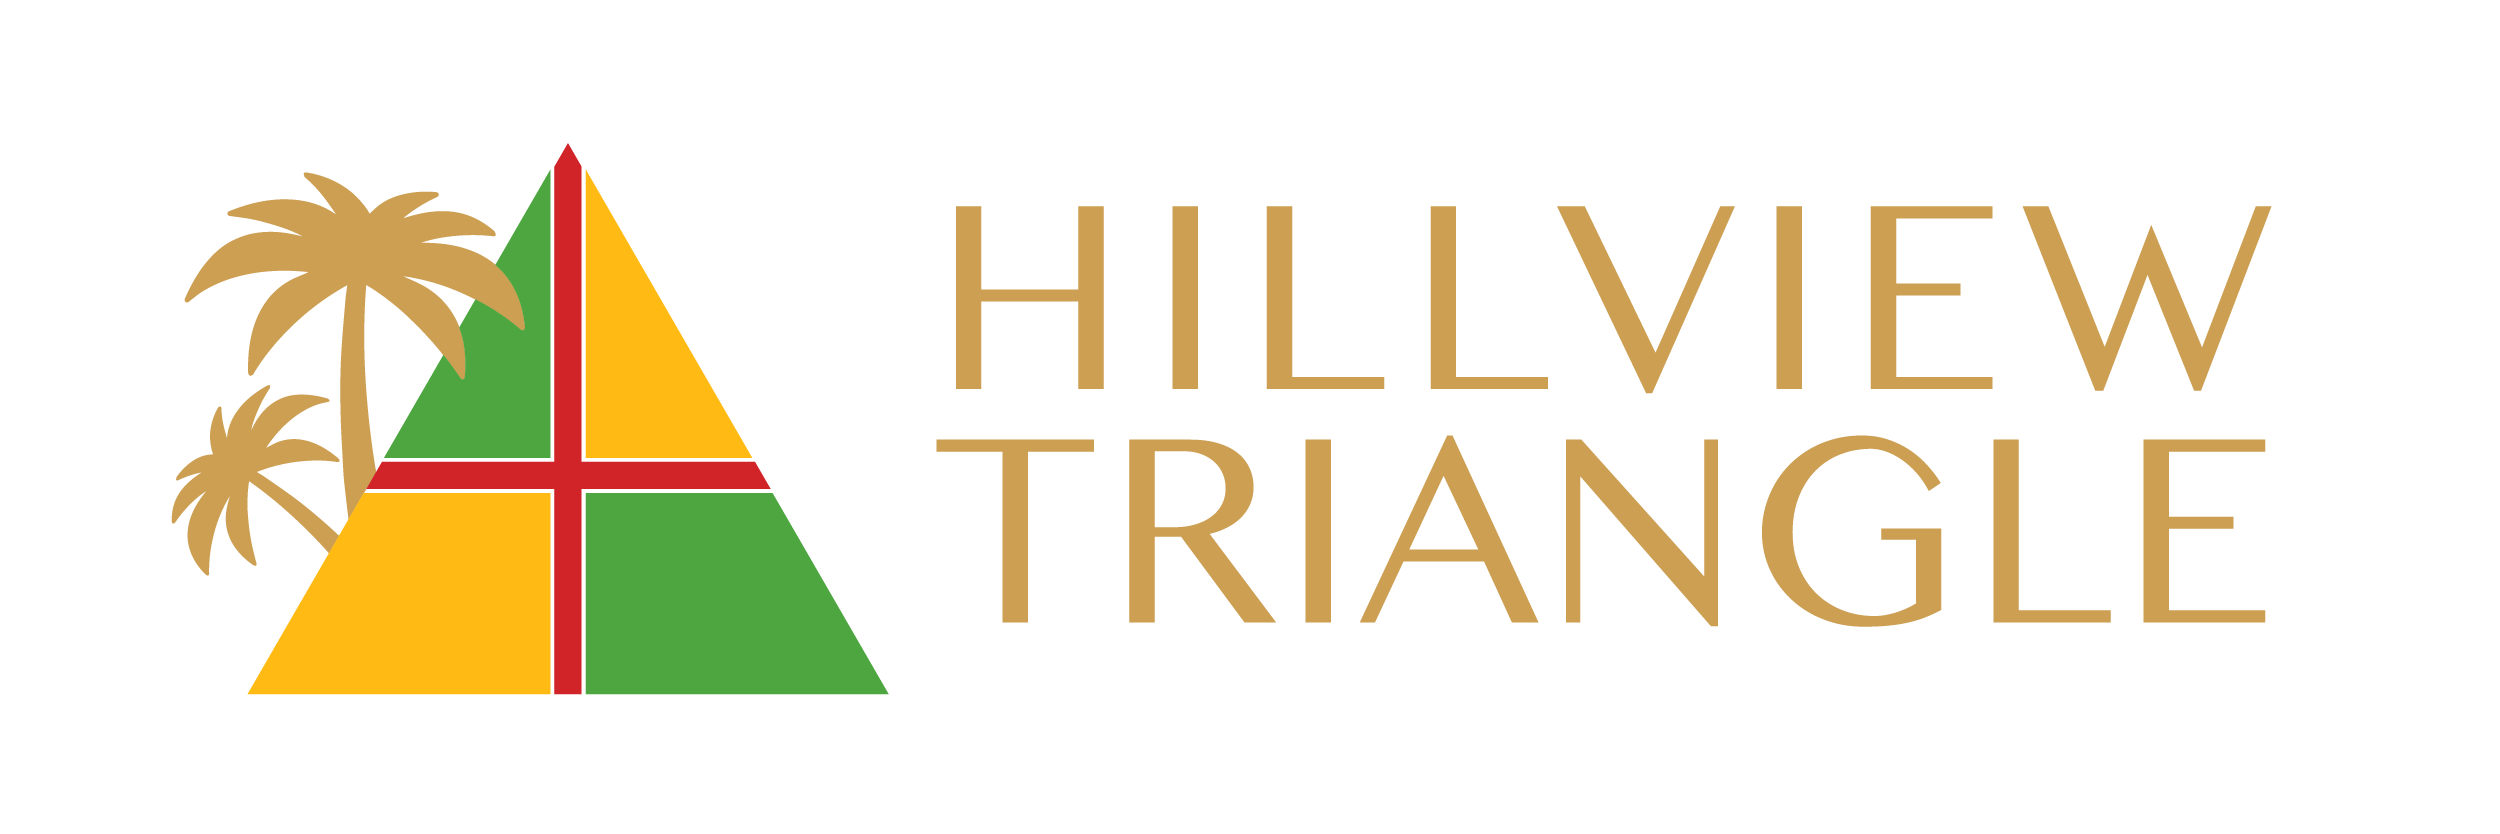 Hillview Triangle